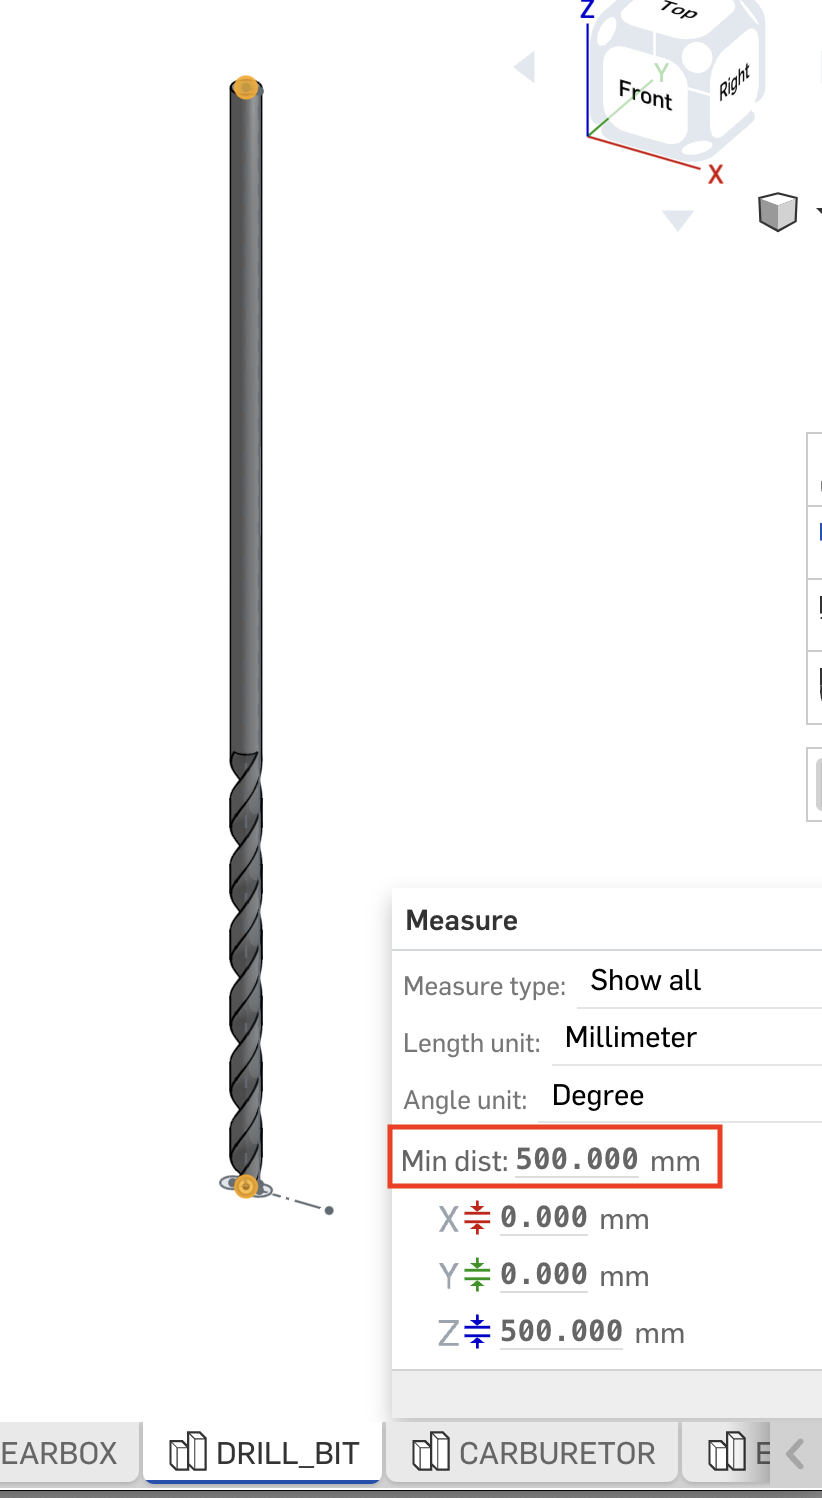 Measure tool in Onshape UI showing drill length as 500 mm